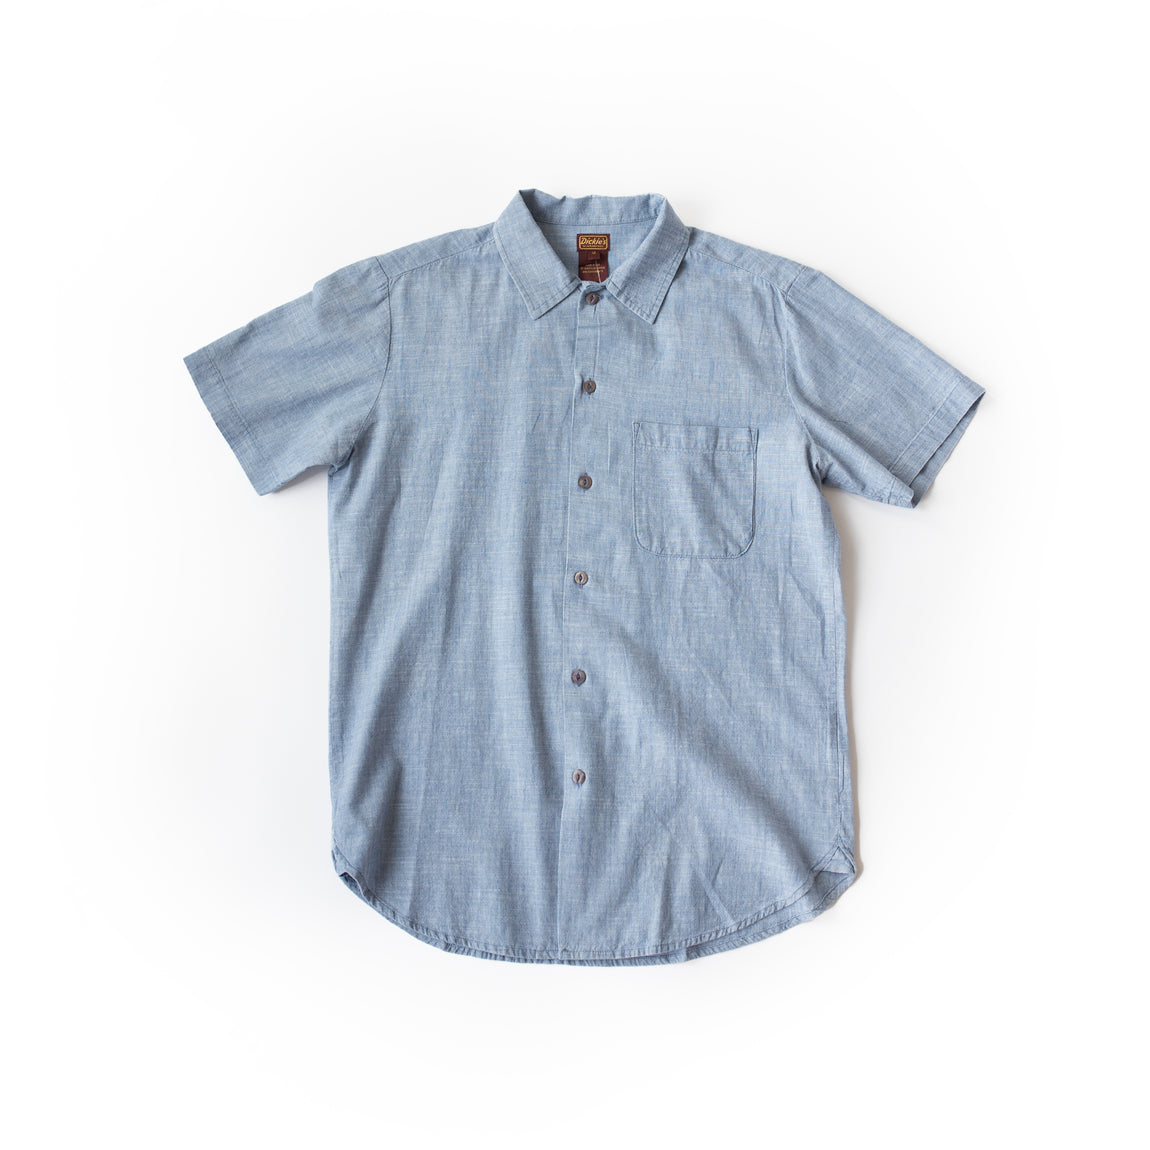 Dickies 1922 Short Sleeve Shirt (Bleached Selvedge Chambray) - Dickies 1922 Short Sleeve Shirt (Bleached Selvedge Chambray) - 